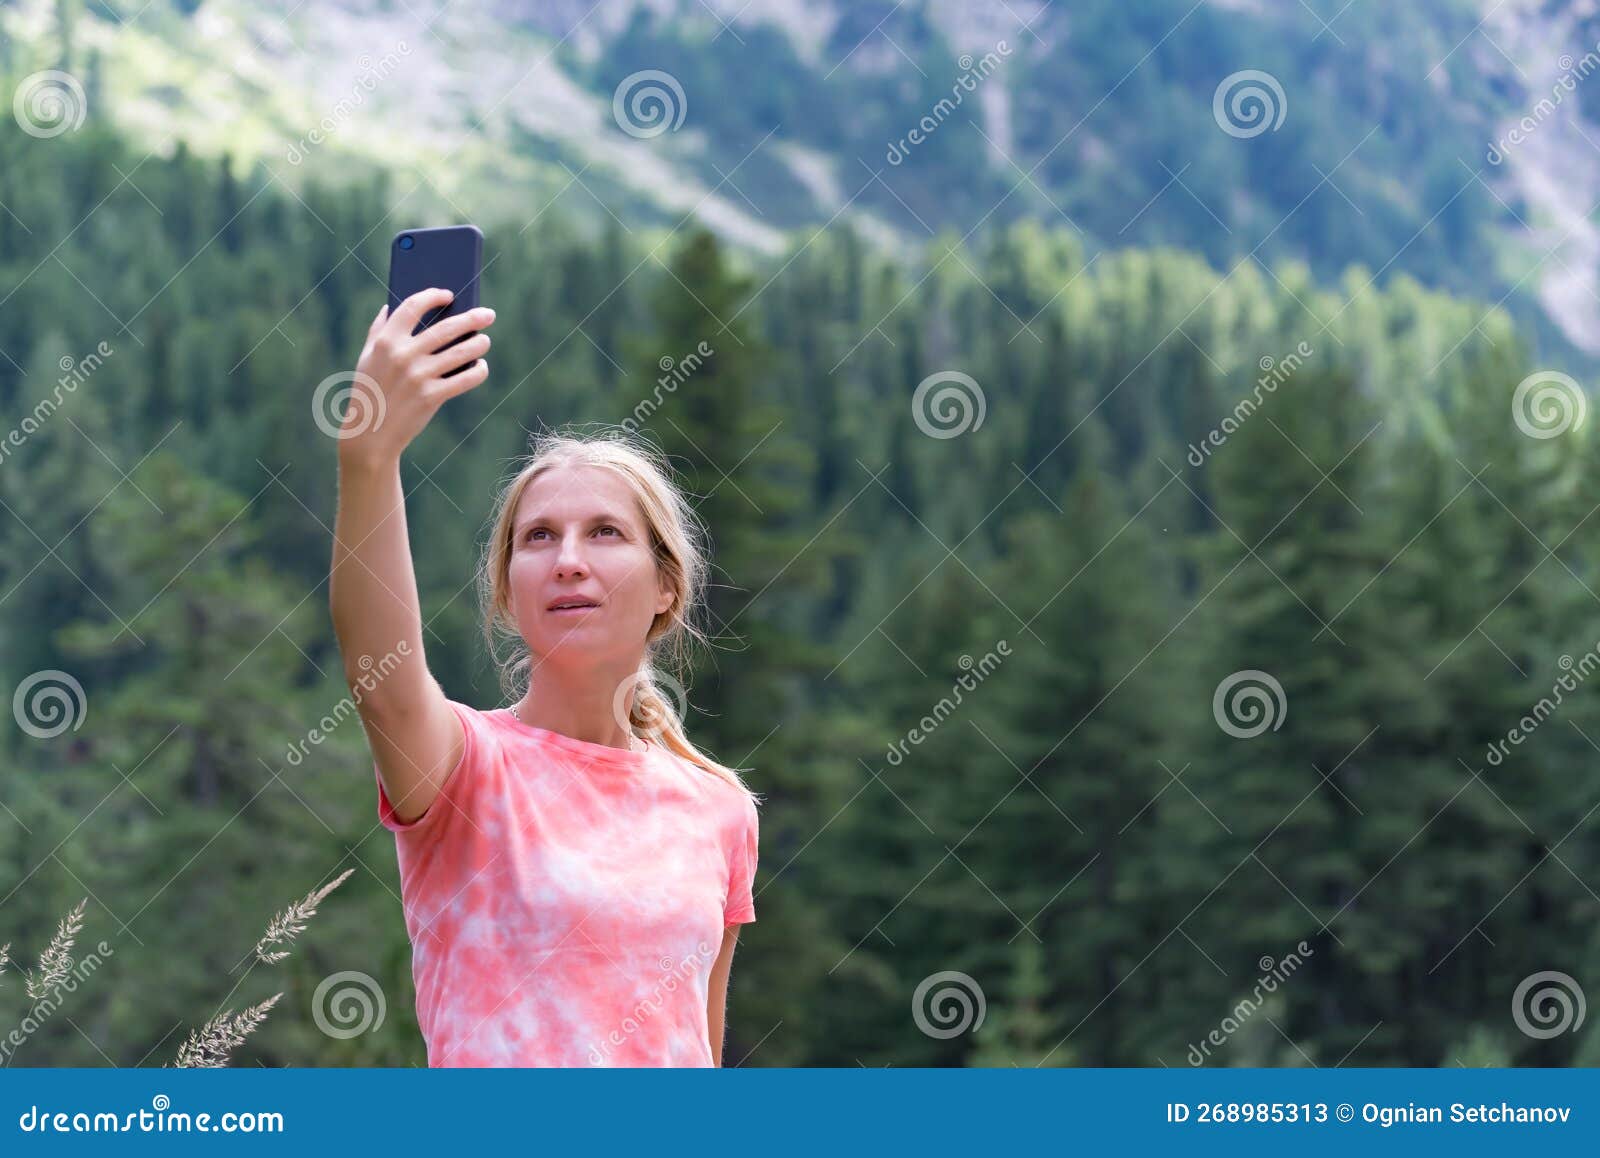 Blonde girl with a ponytail taking a selfie - wide 1